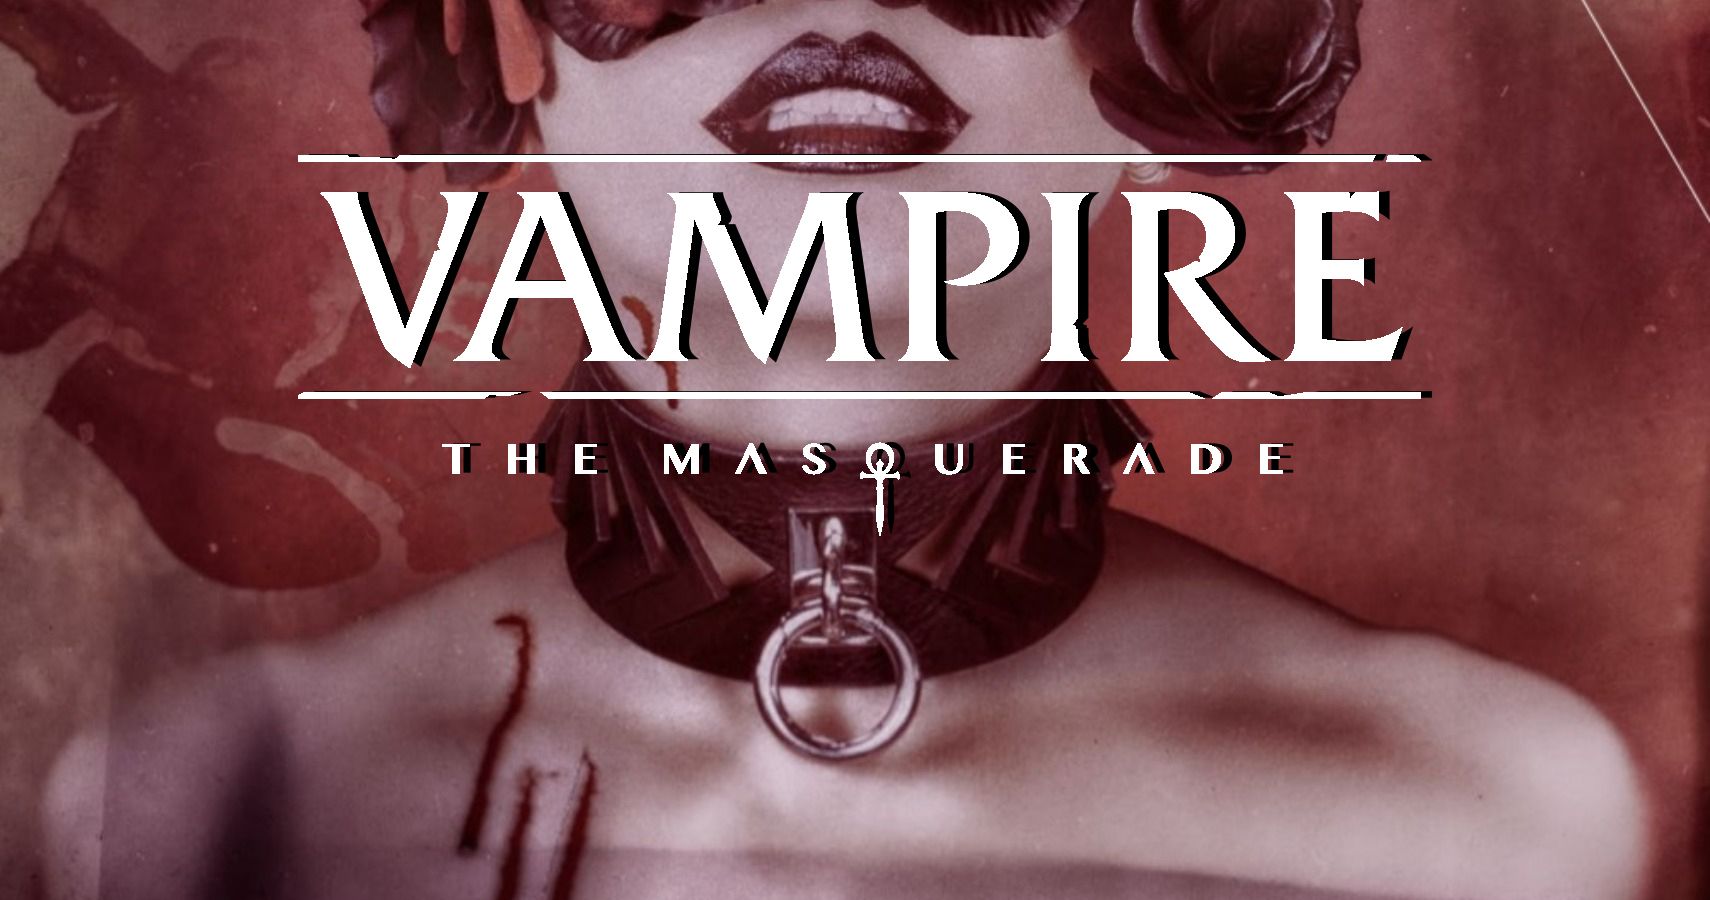 How To Start Playing The Vampire: The Masquerade TTRPG